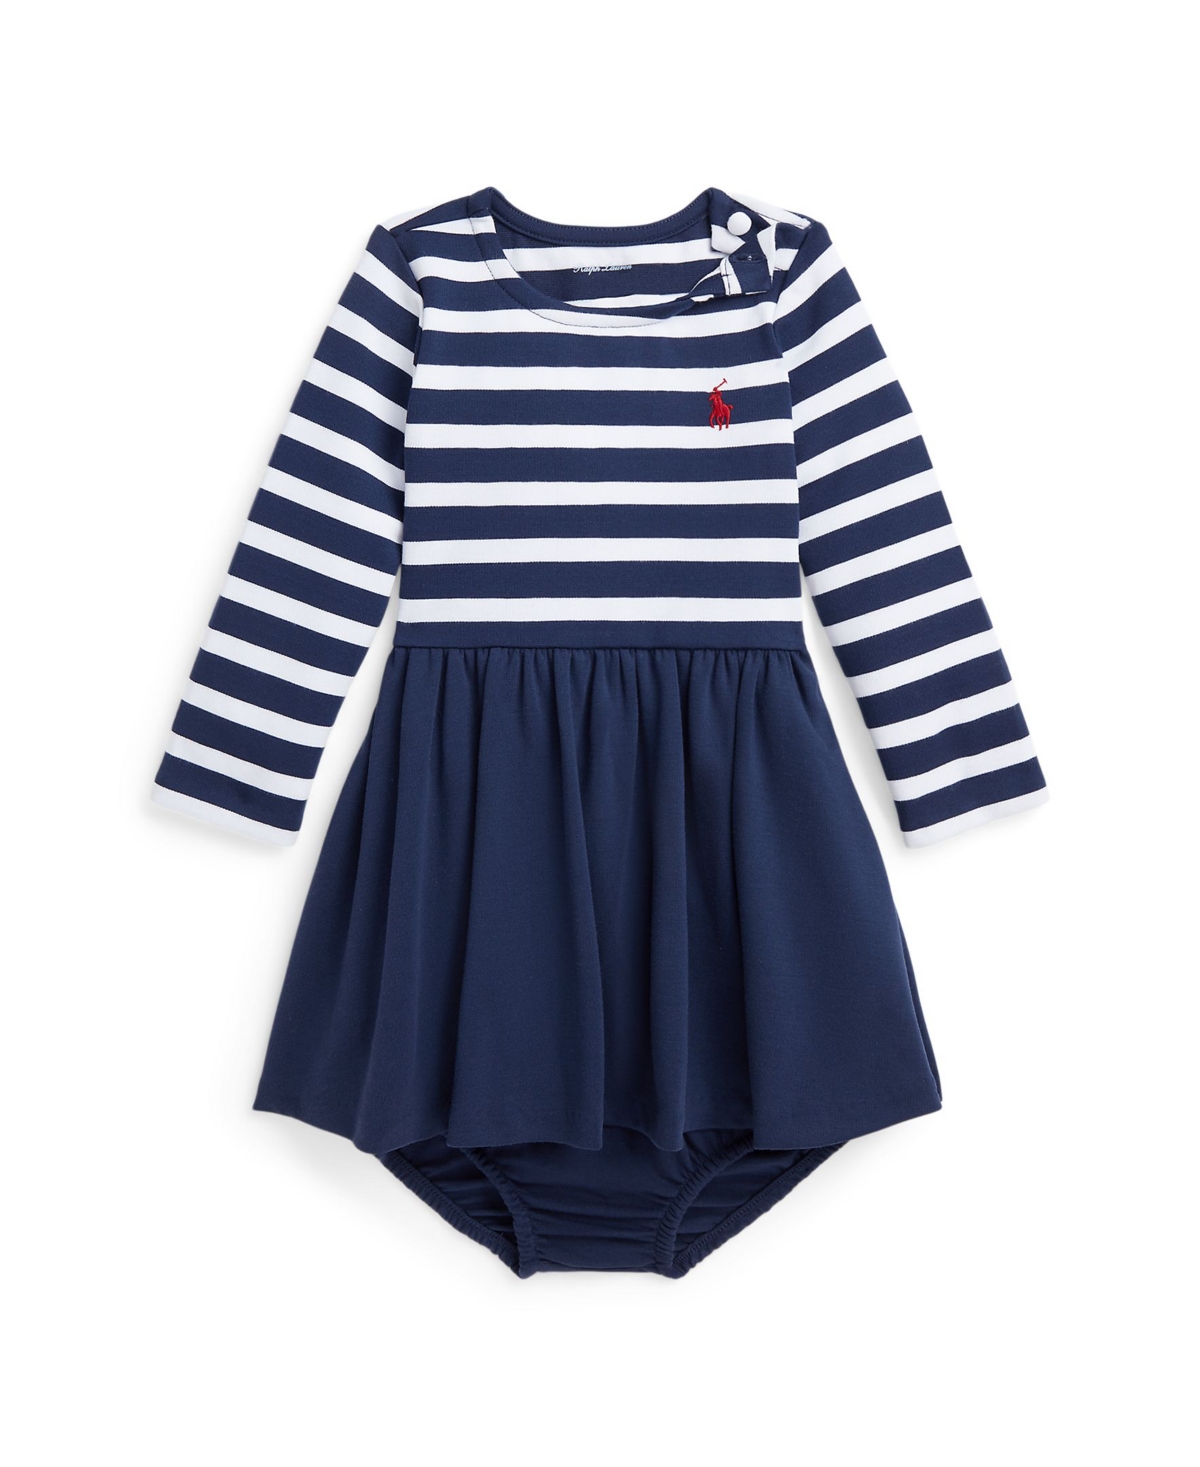 Shop Polo Ralph Lauren Baby Girls Striped Stretch Ponte Dress And Bloomer Set In Newport Navy With White